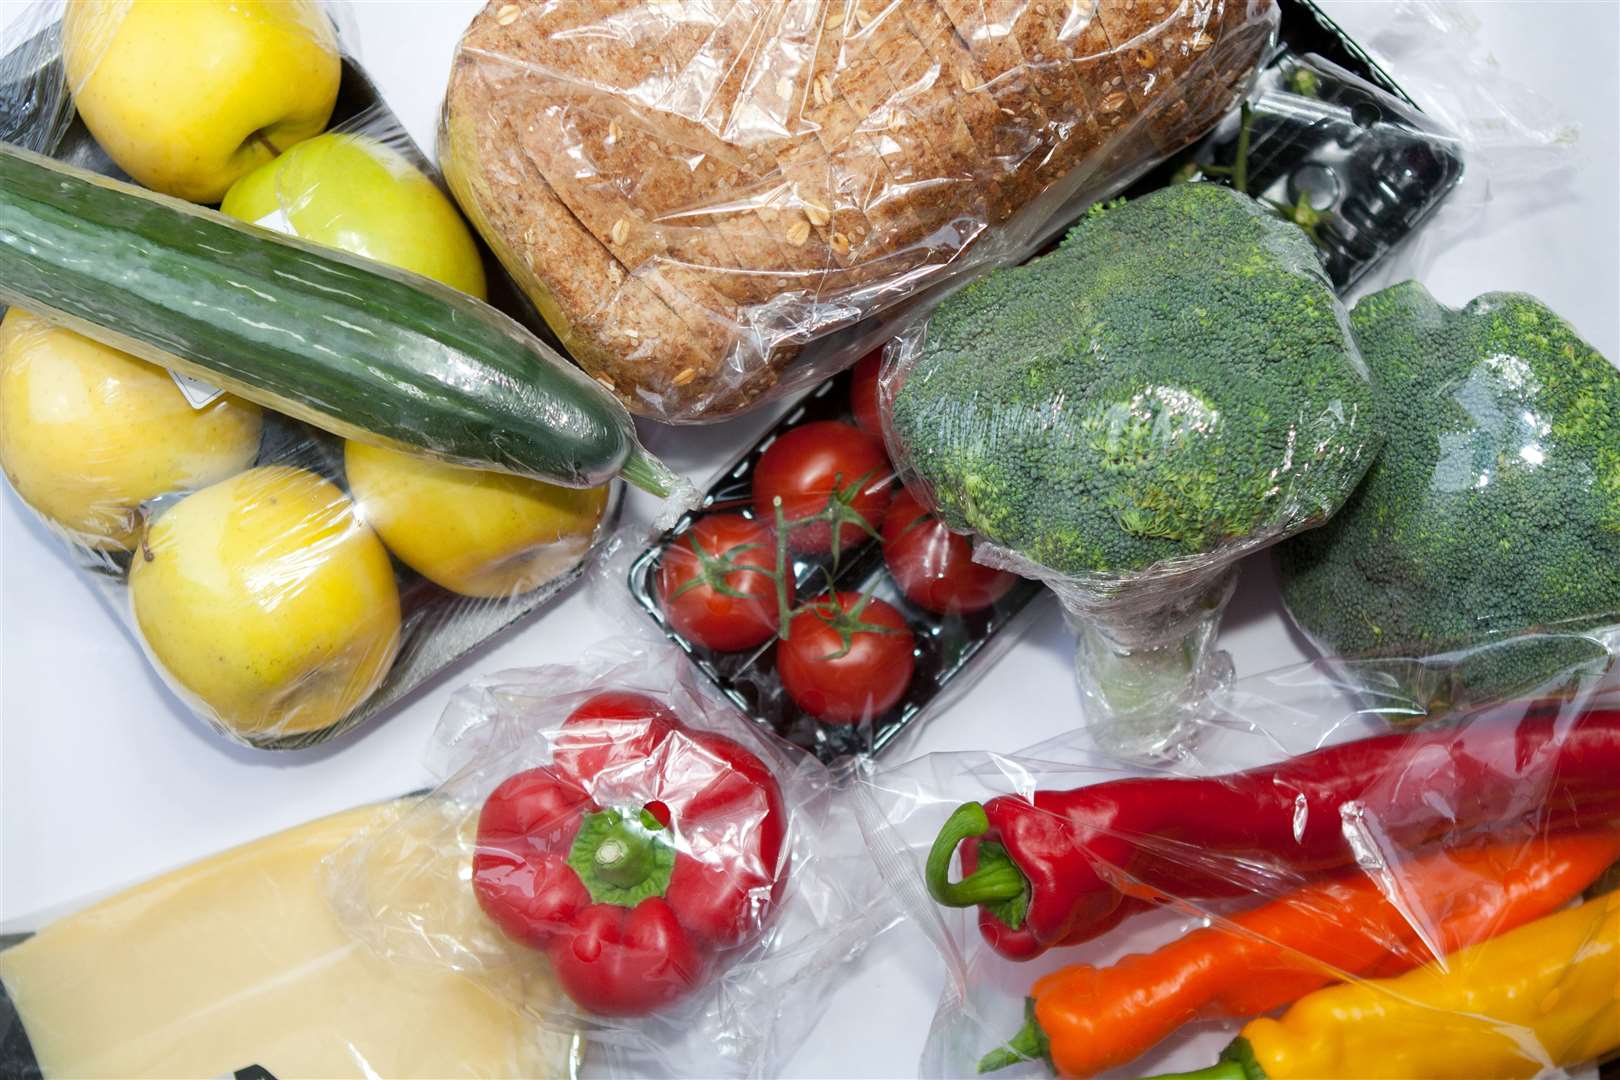 That's a wrap: plastic packaging is too often used in supermarket fruit and veg aisles.